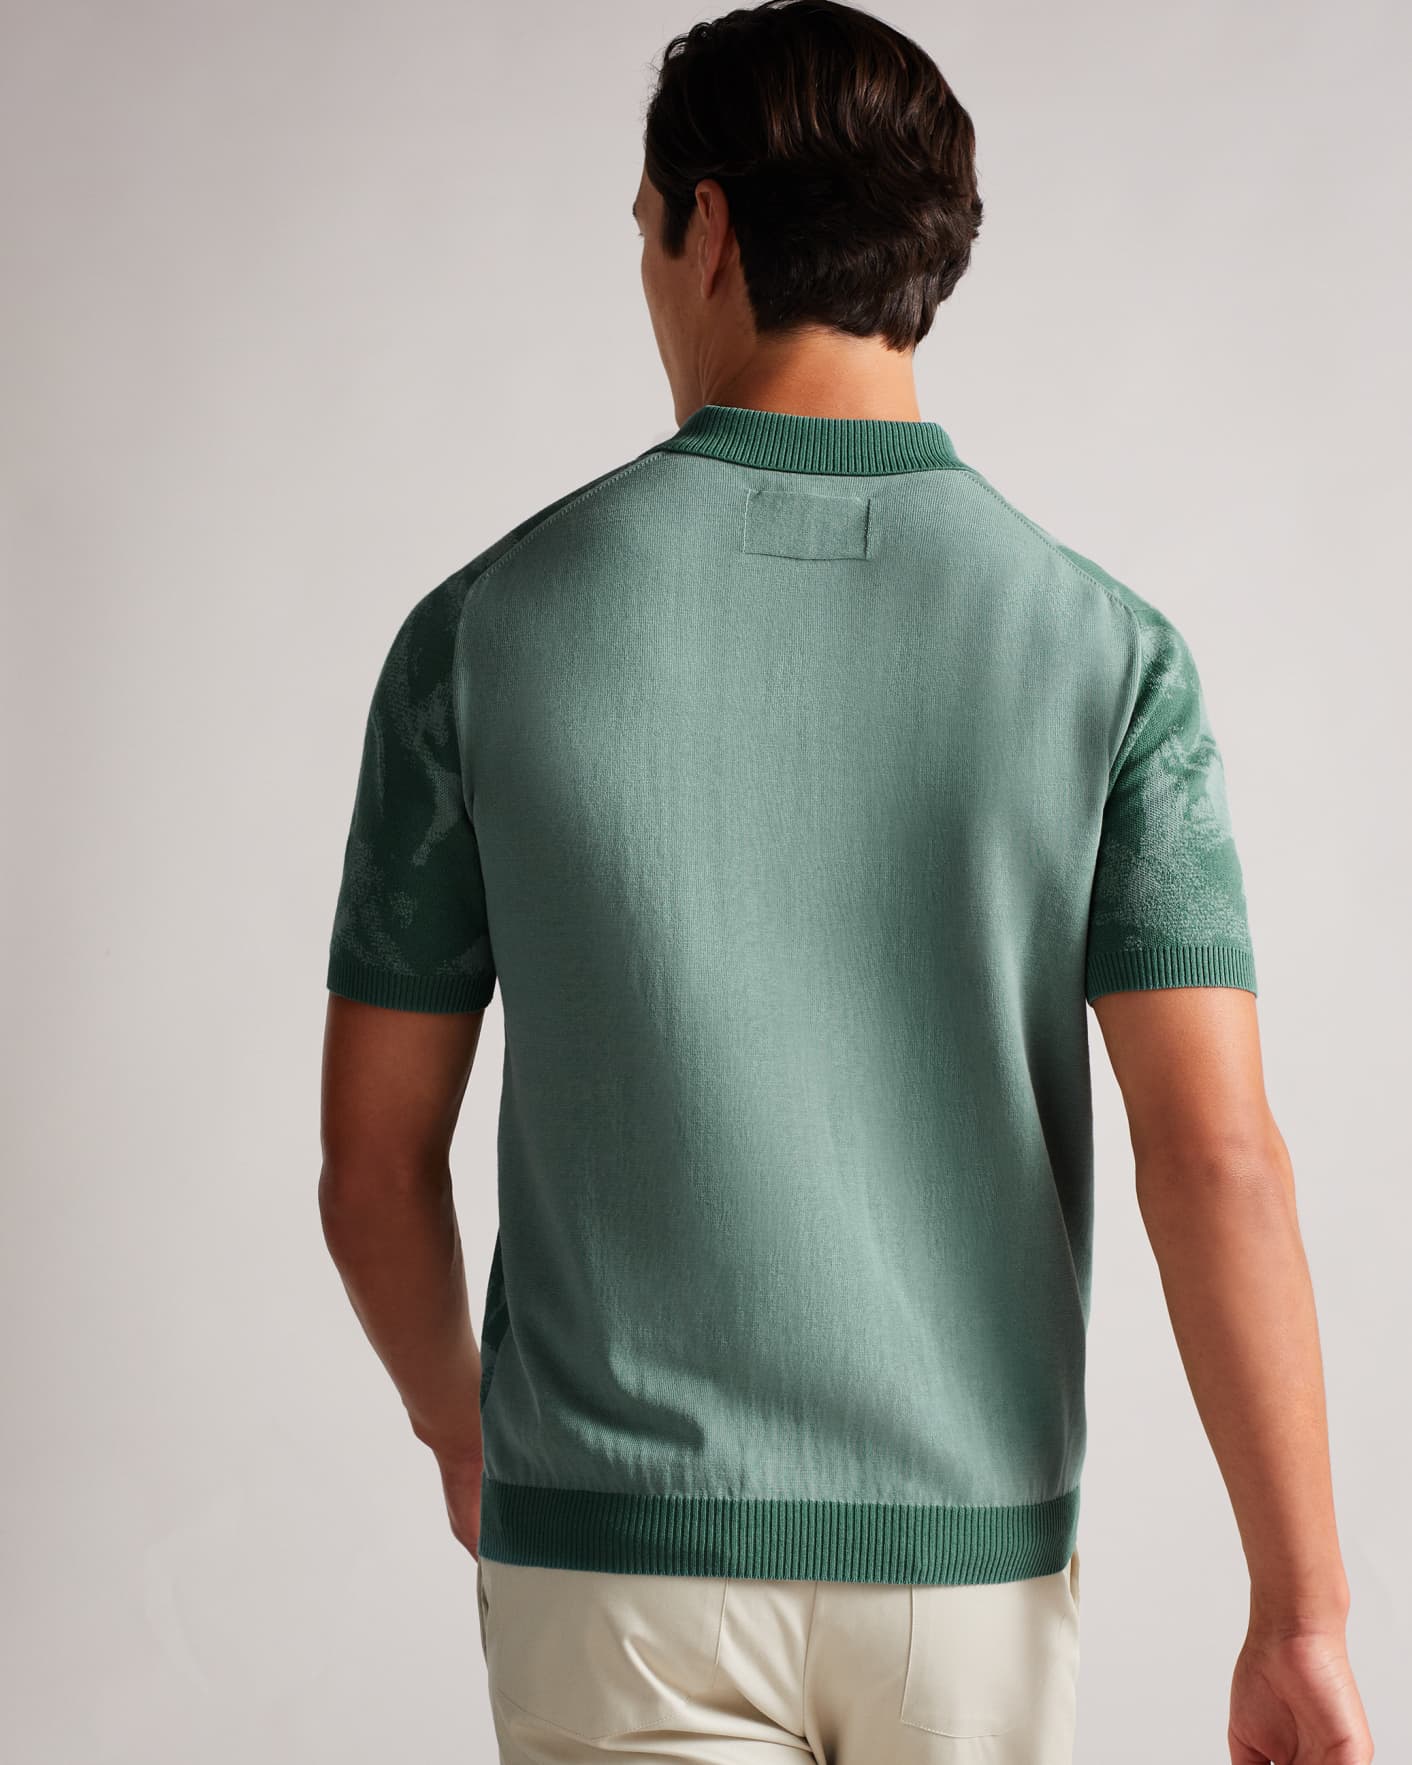 Teal-Blue MIB Matchday Polo Ted Baker